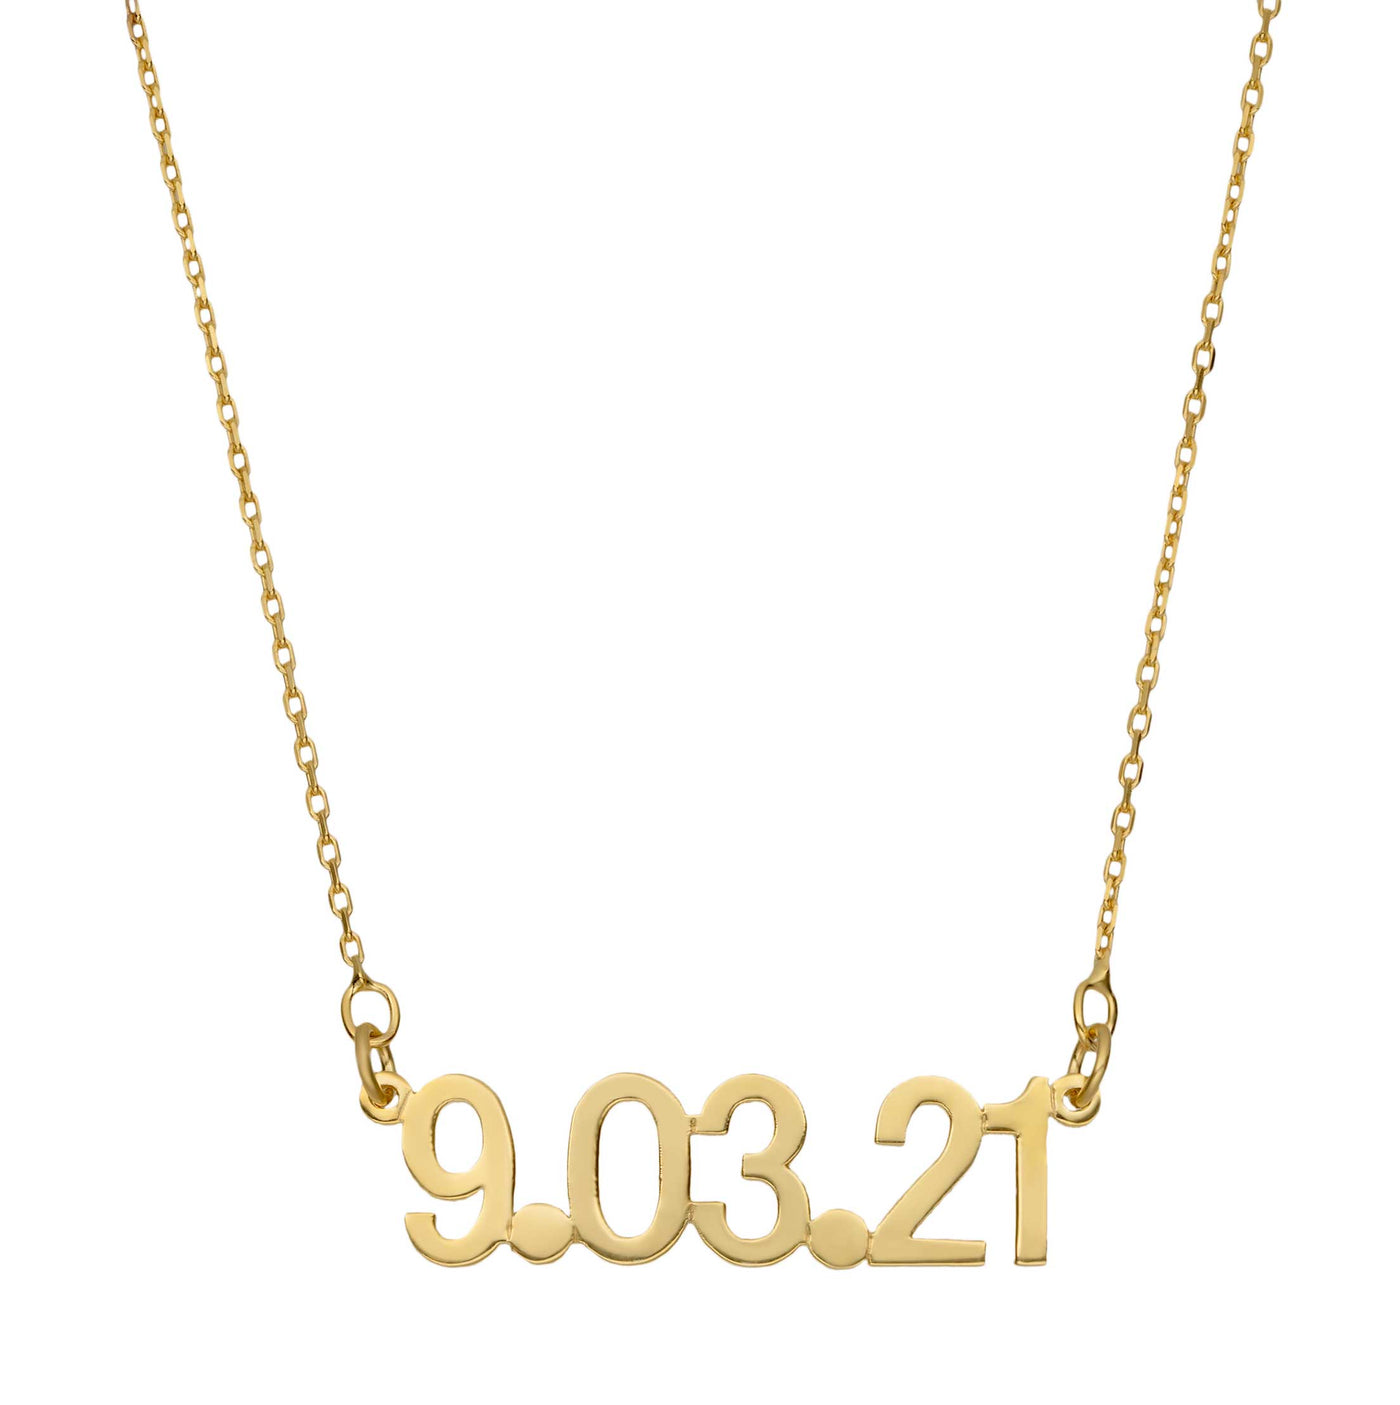 Ladies Shiny Date Necklace 14K Gold - Style 176